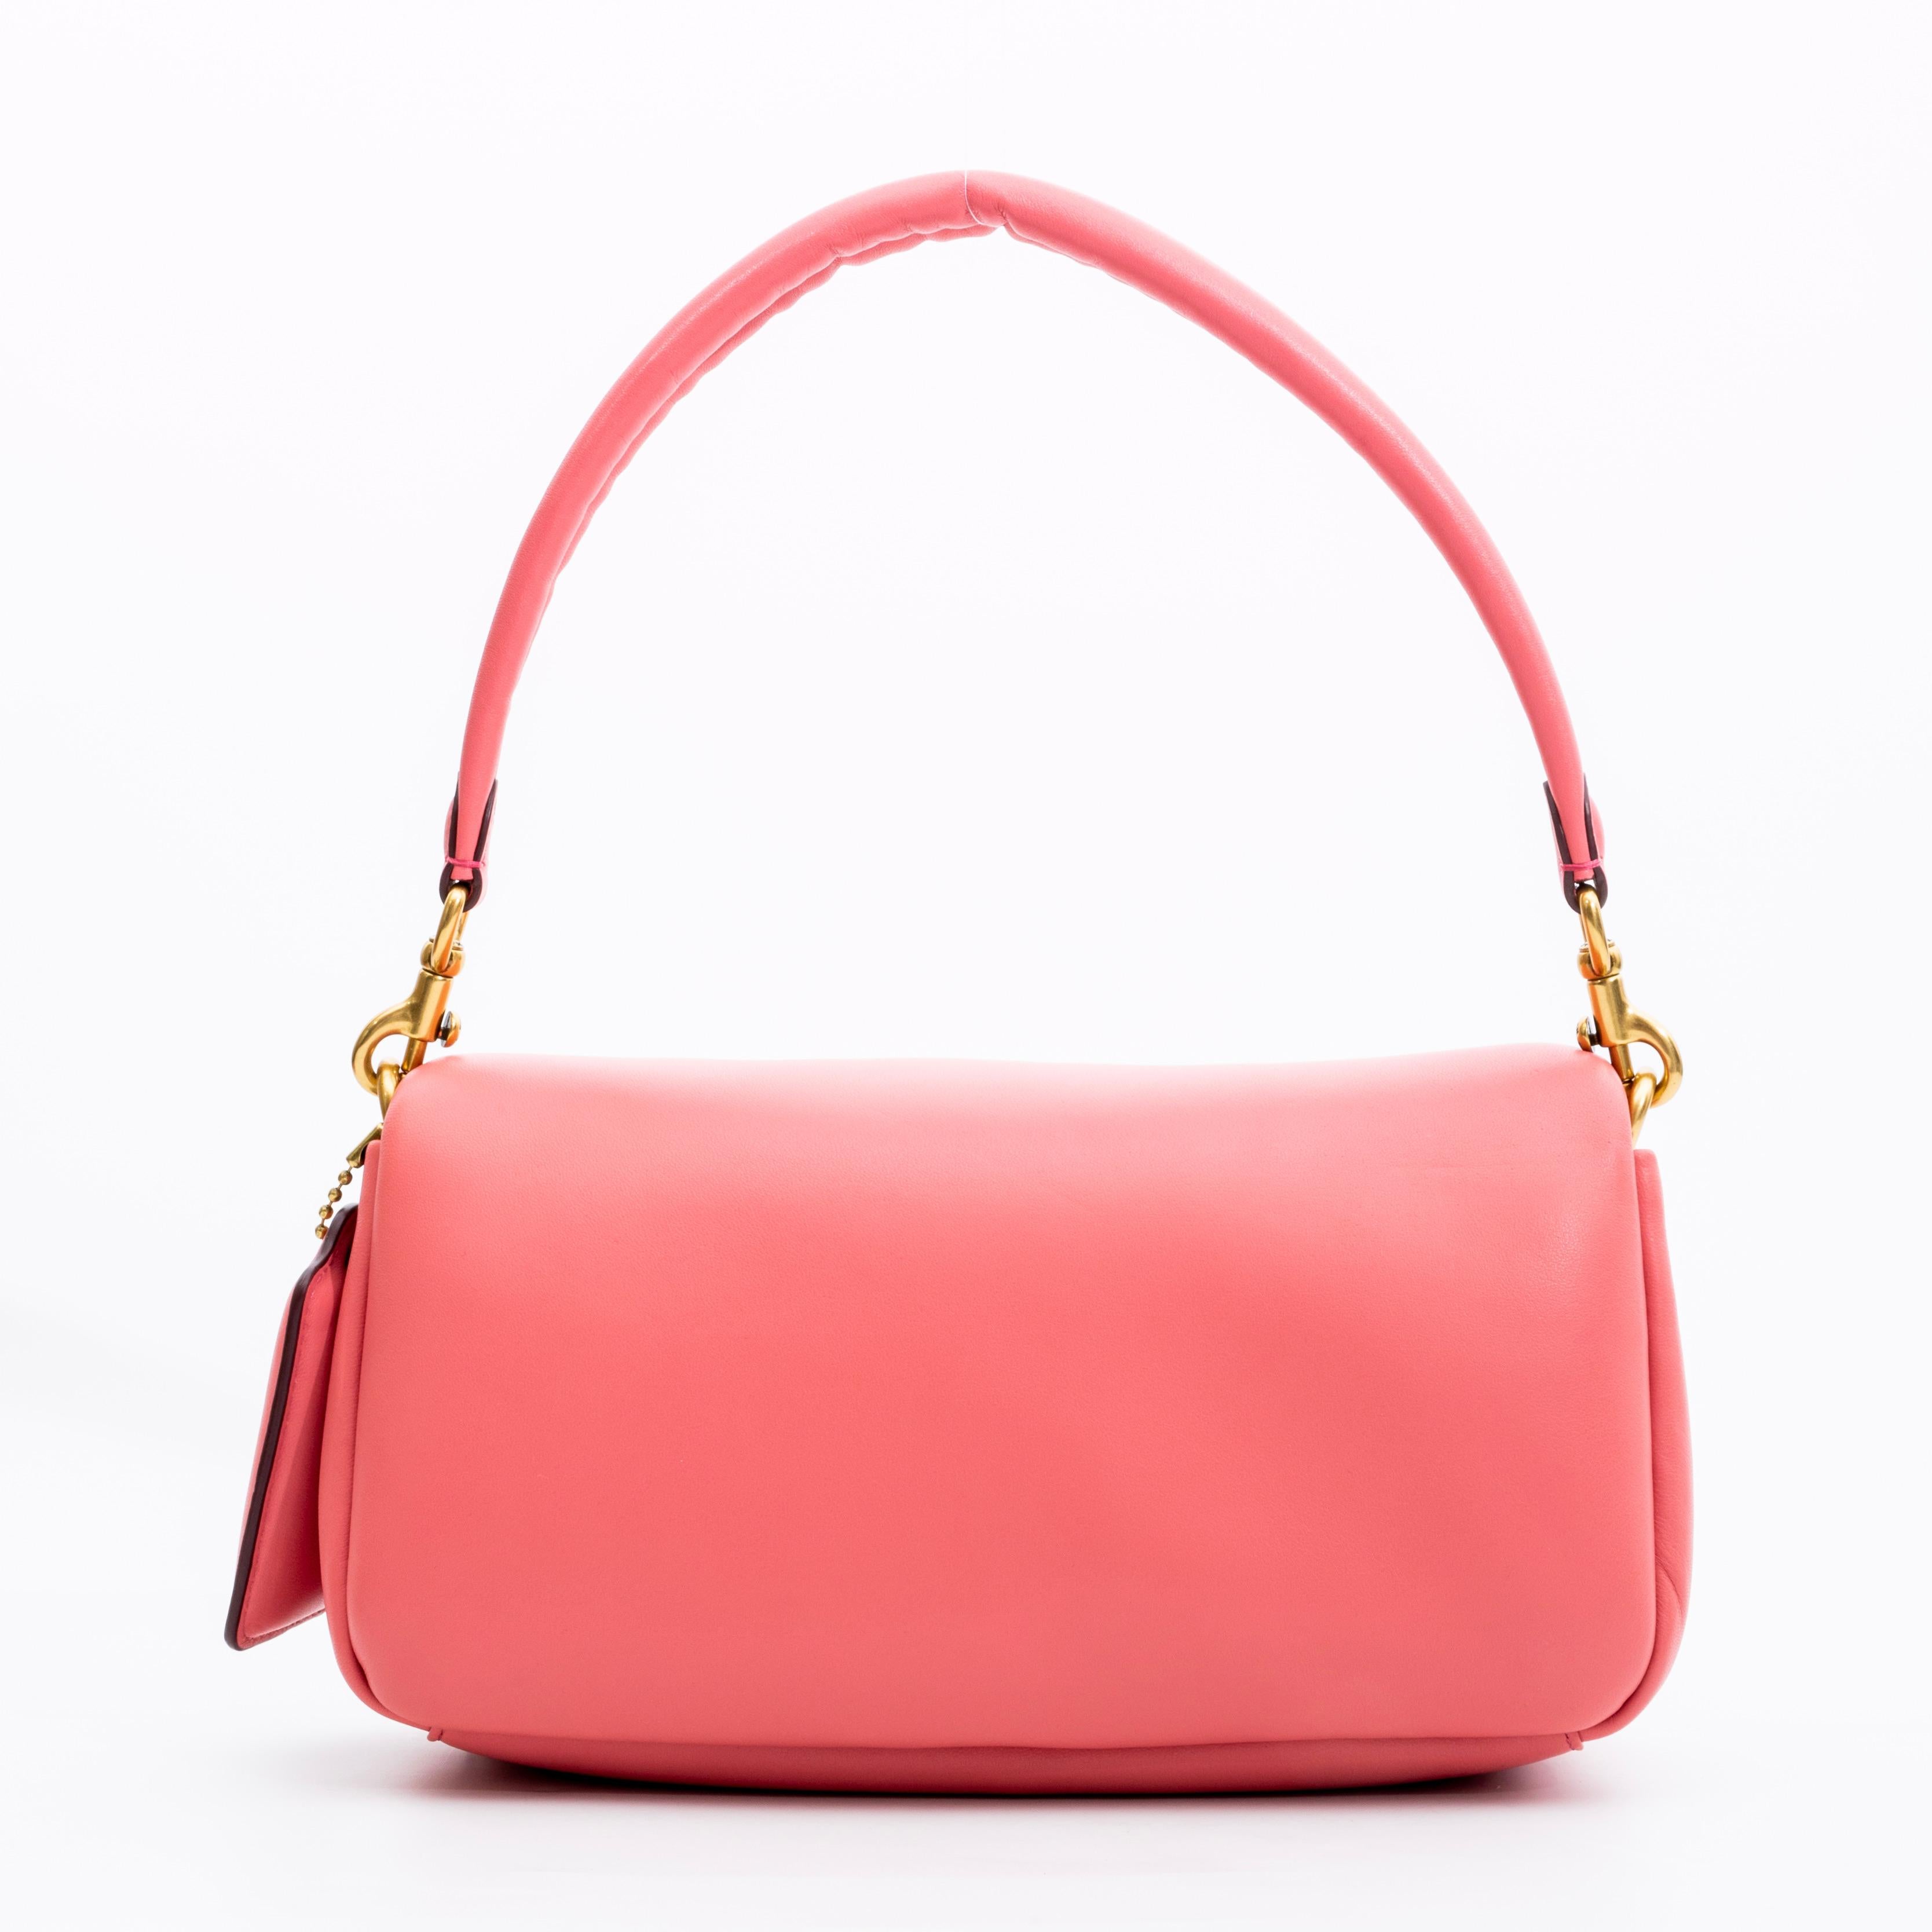 This bag is made with nappa leather and smooth leather and features pillowy padding, snap closure on flap, removable/adjustable crossbody strap, dual interior compartments and can be worn shoulder or cross body.

COLOR: Pink
MATERIAL: Leather
ITEM